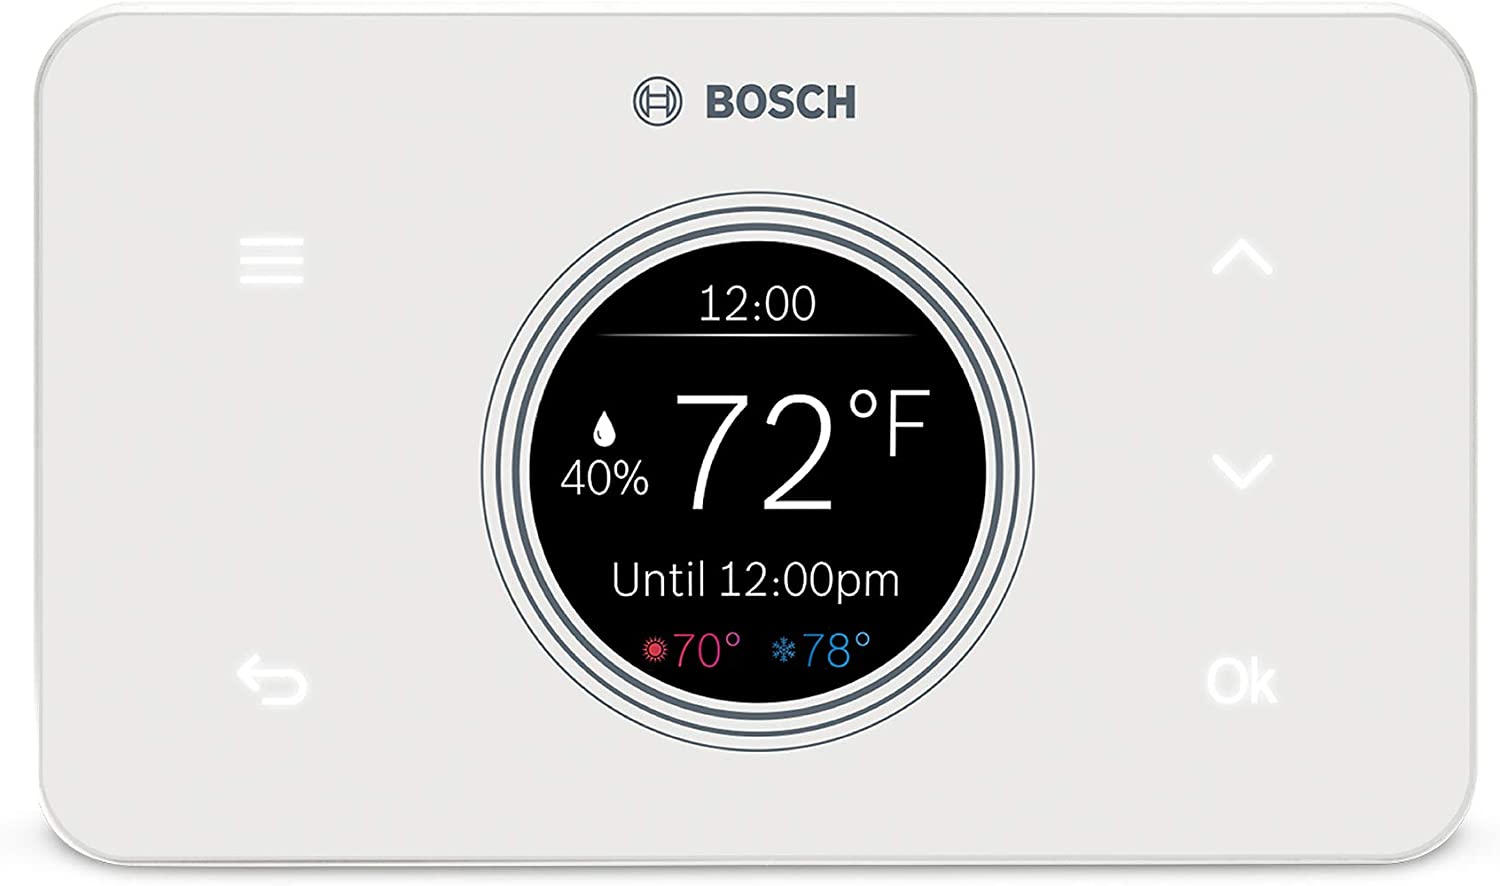 Bosch Thermotechnology BCC50 Wi-Fi Thermostat-Works with Alexa and Google Assistant, All-in-One, Touch Screen, Safety Control, Smart Home, White